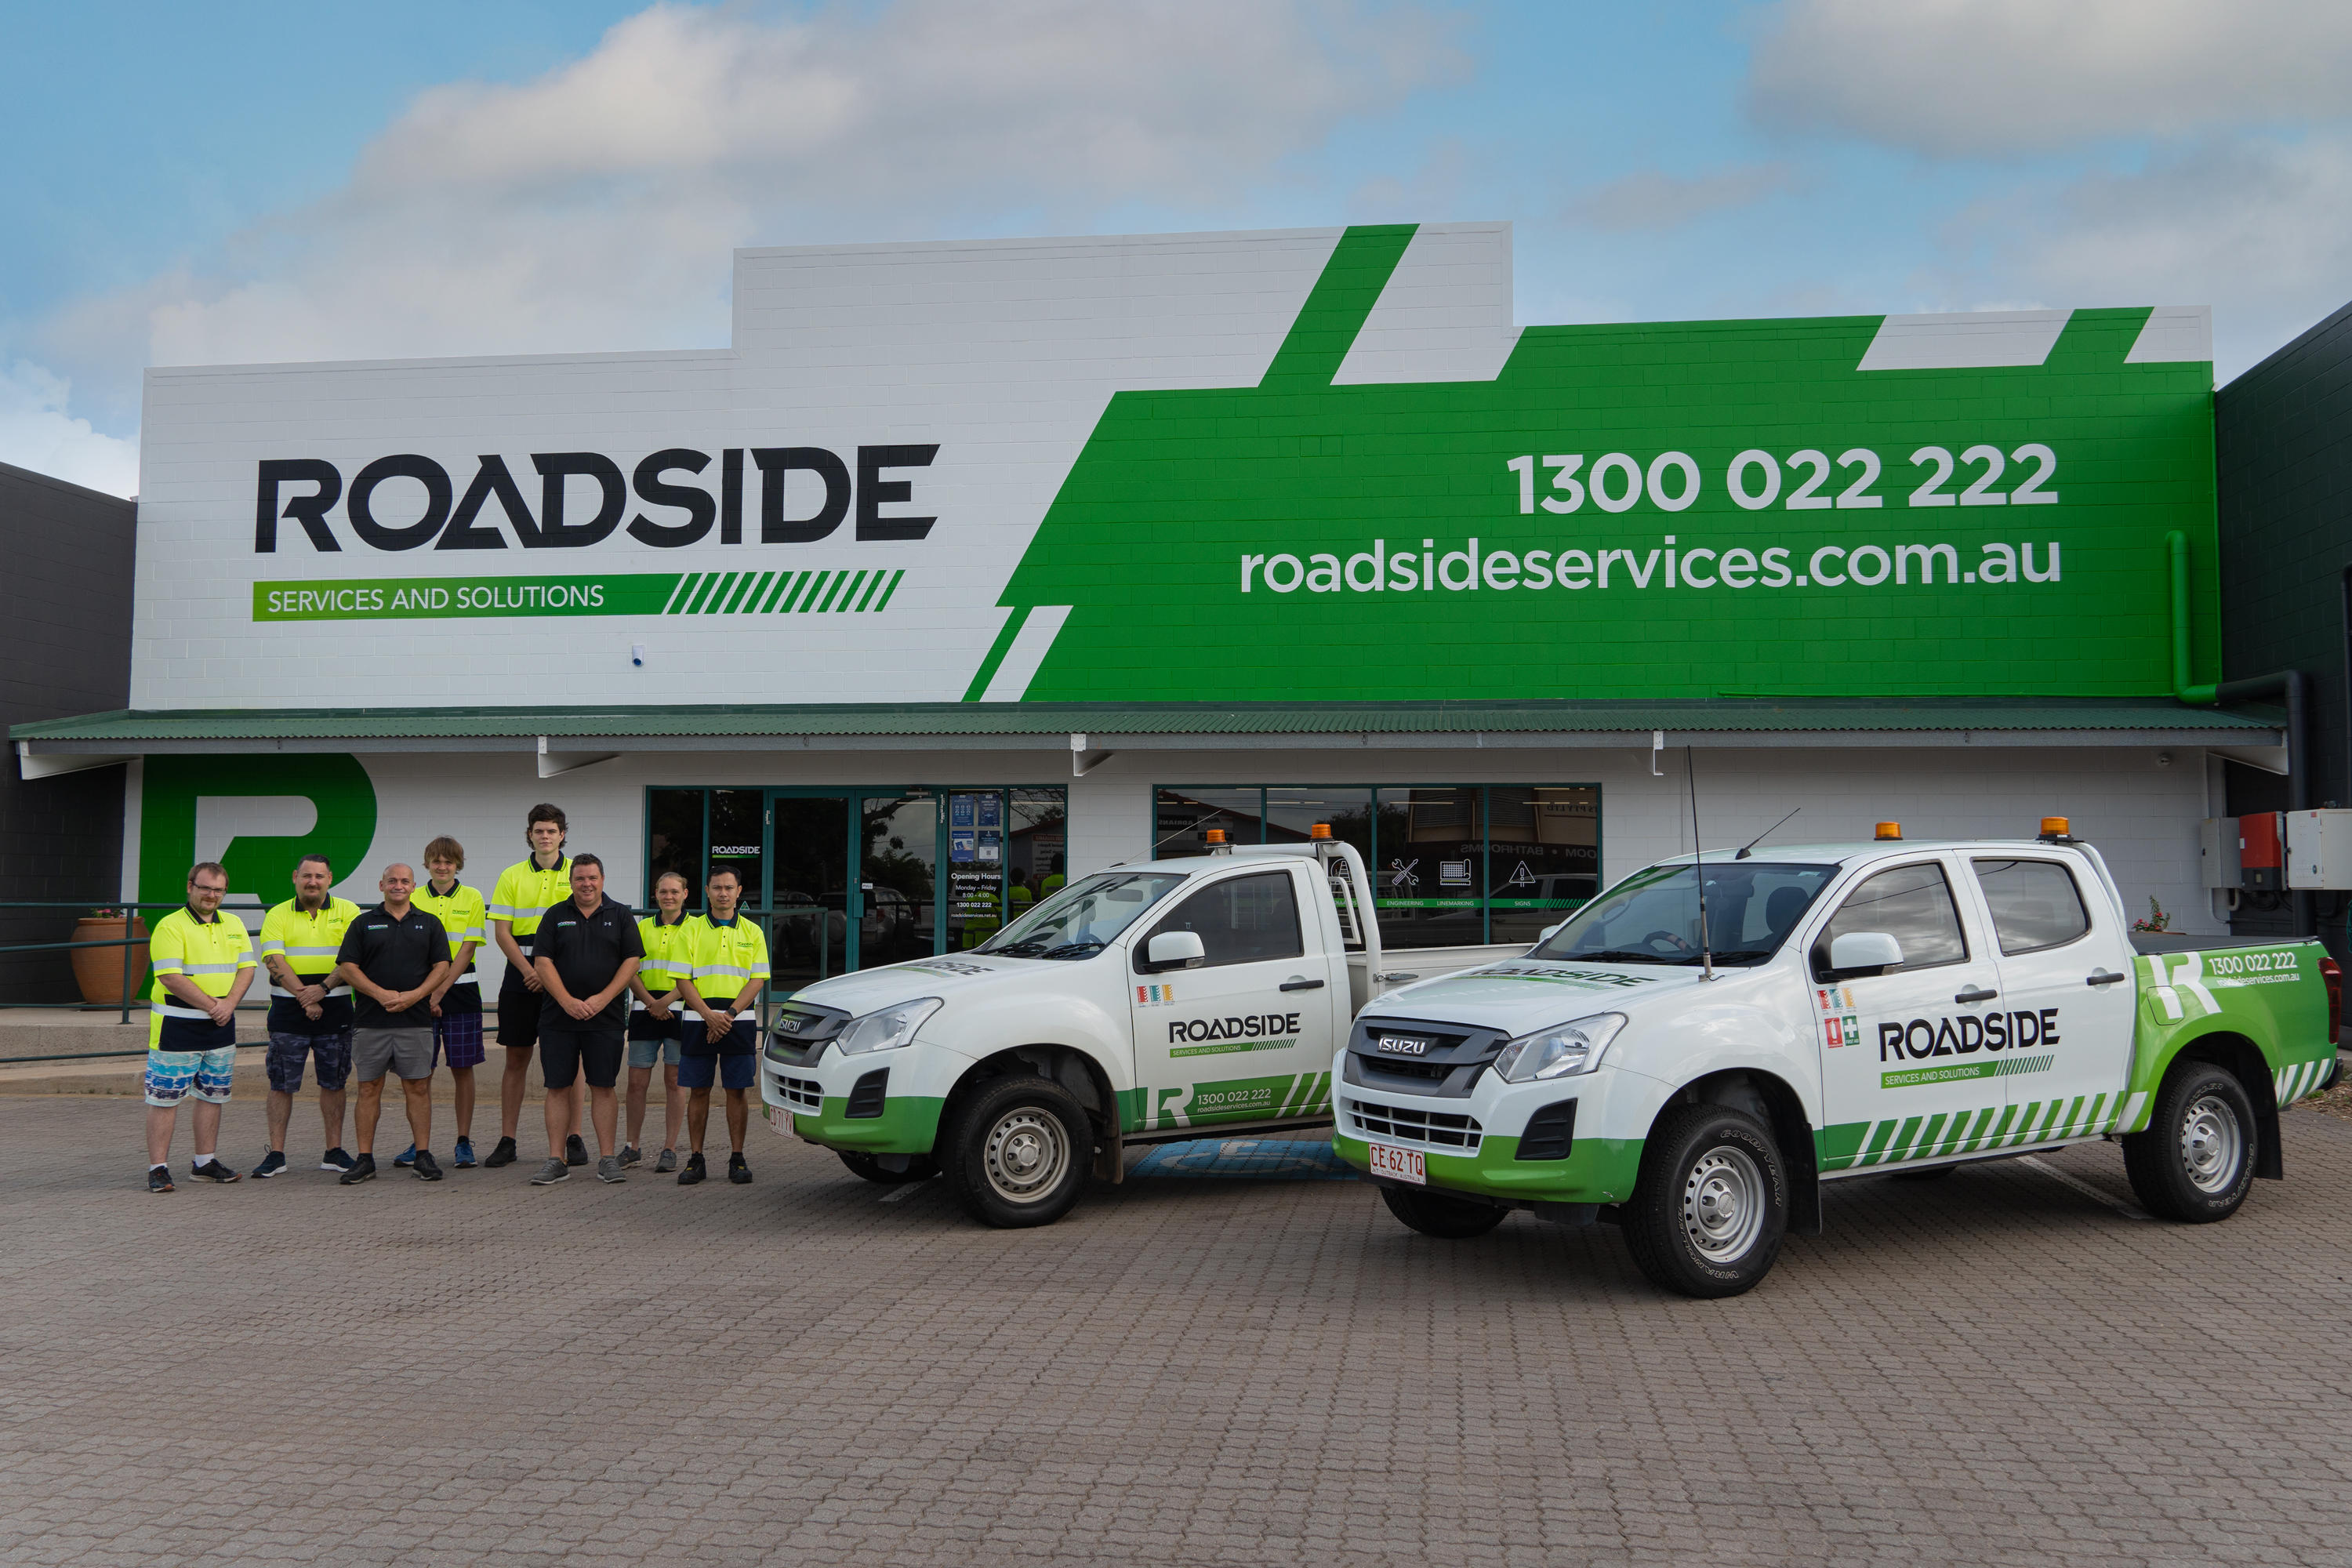 Images Roadside Services and Solutions Pty Ltd